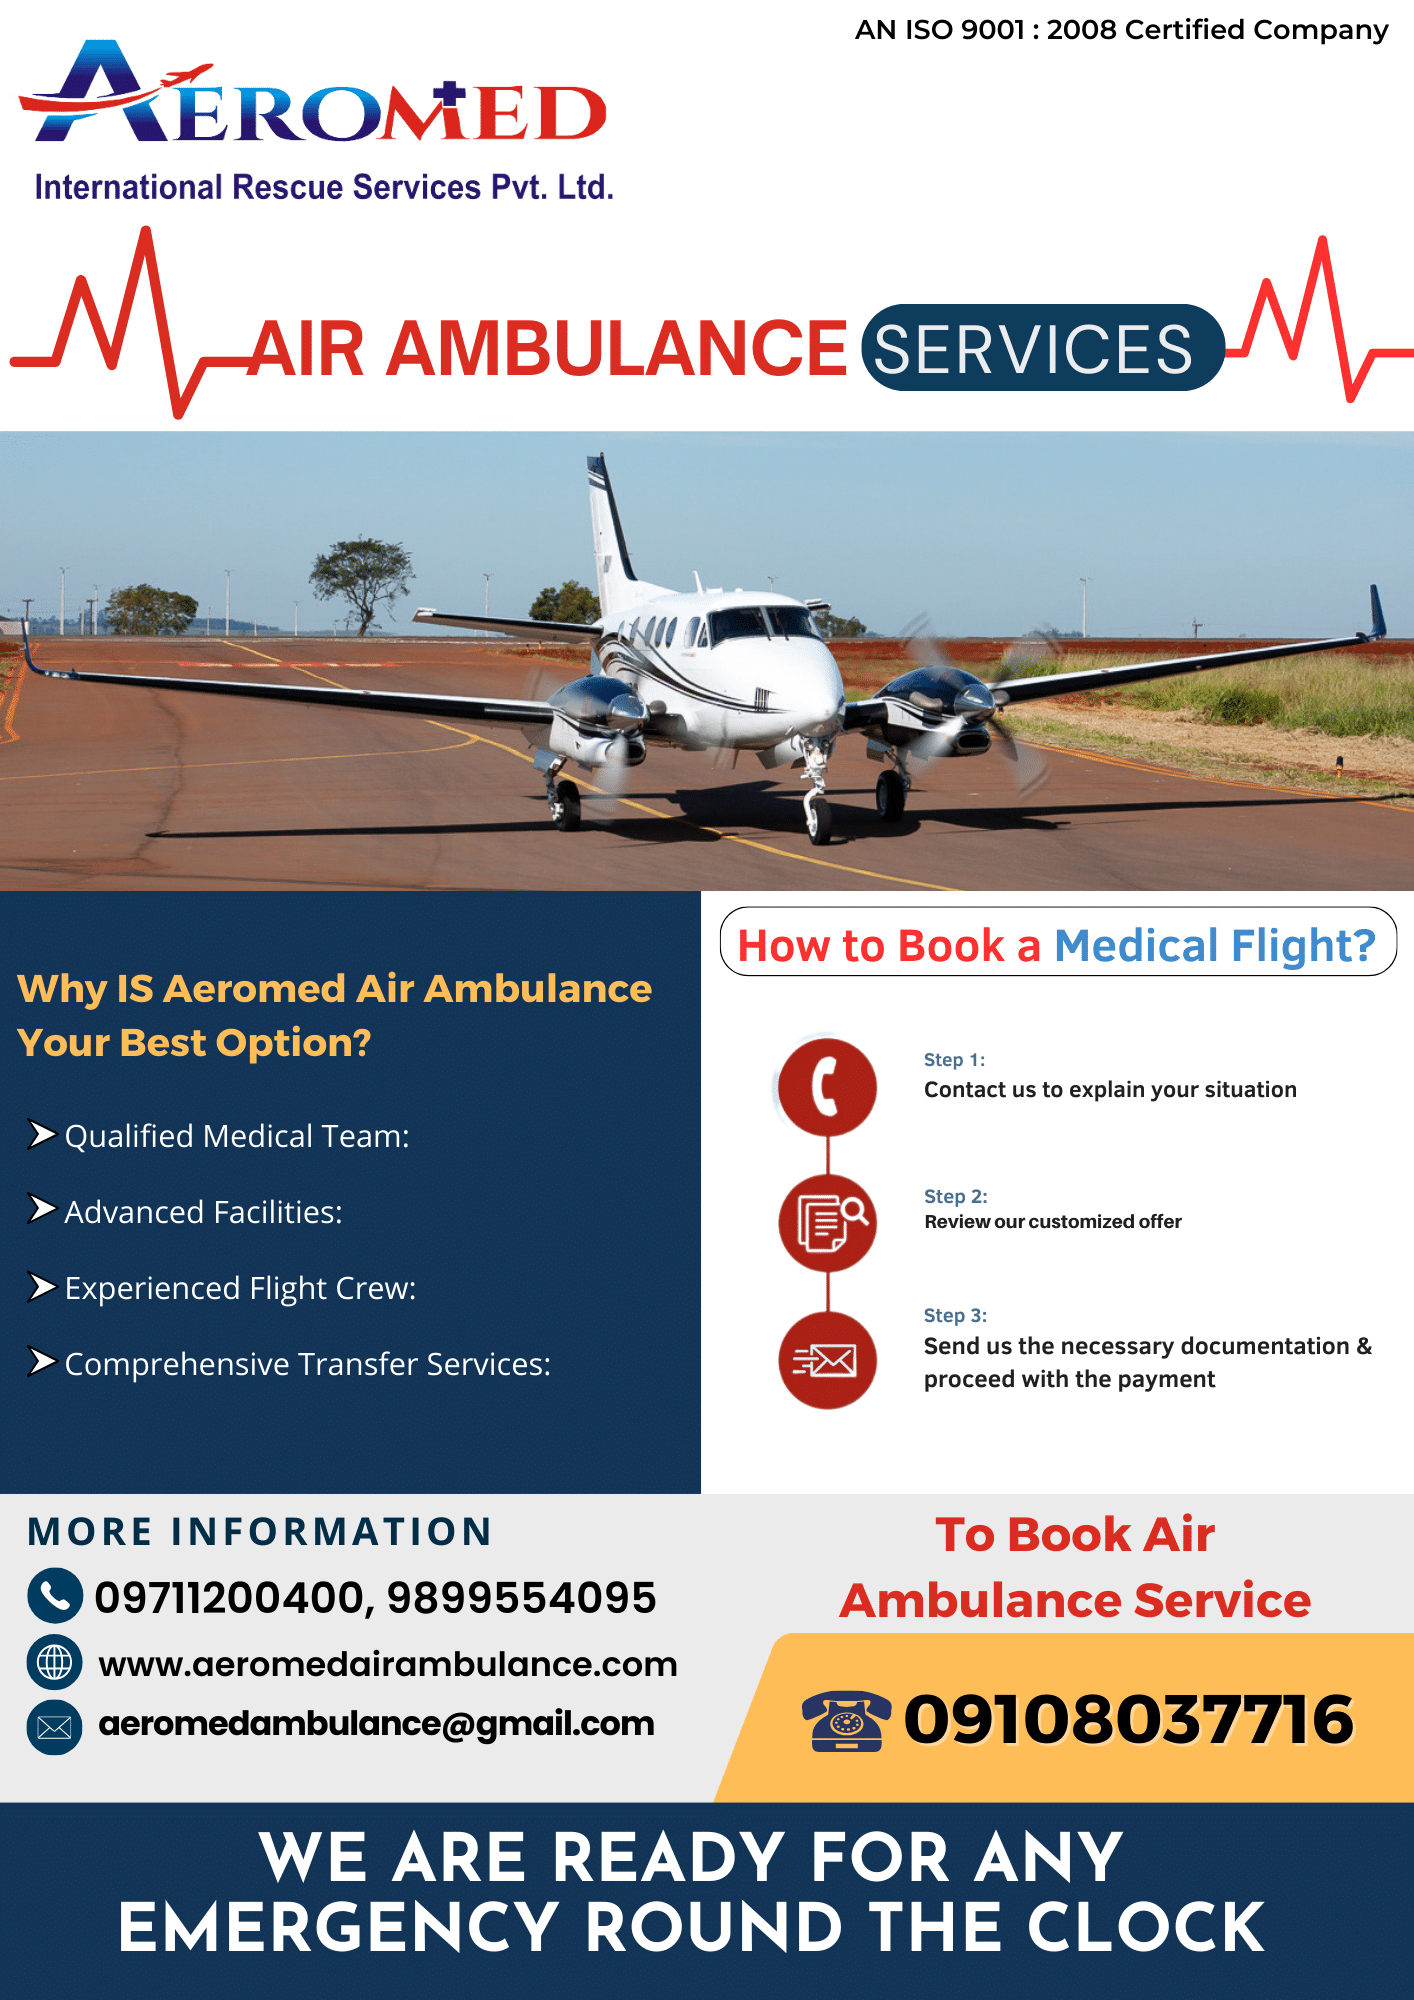 Aeromed Air Ambulance Service Patna - On-Board Check-Up is Available